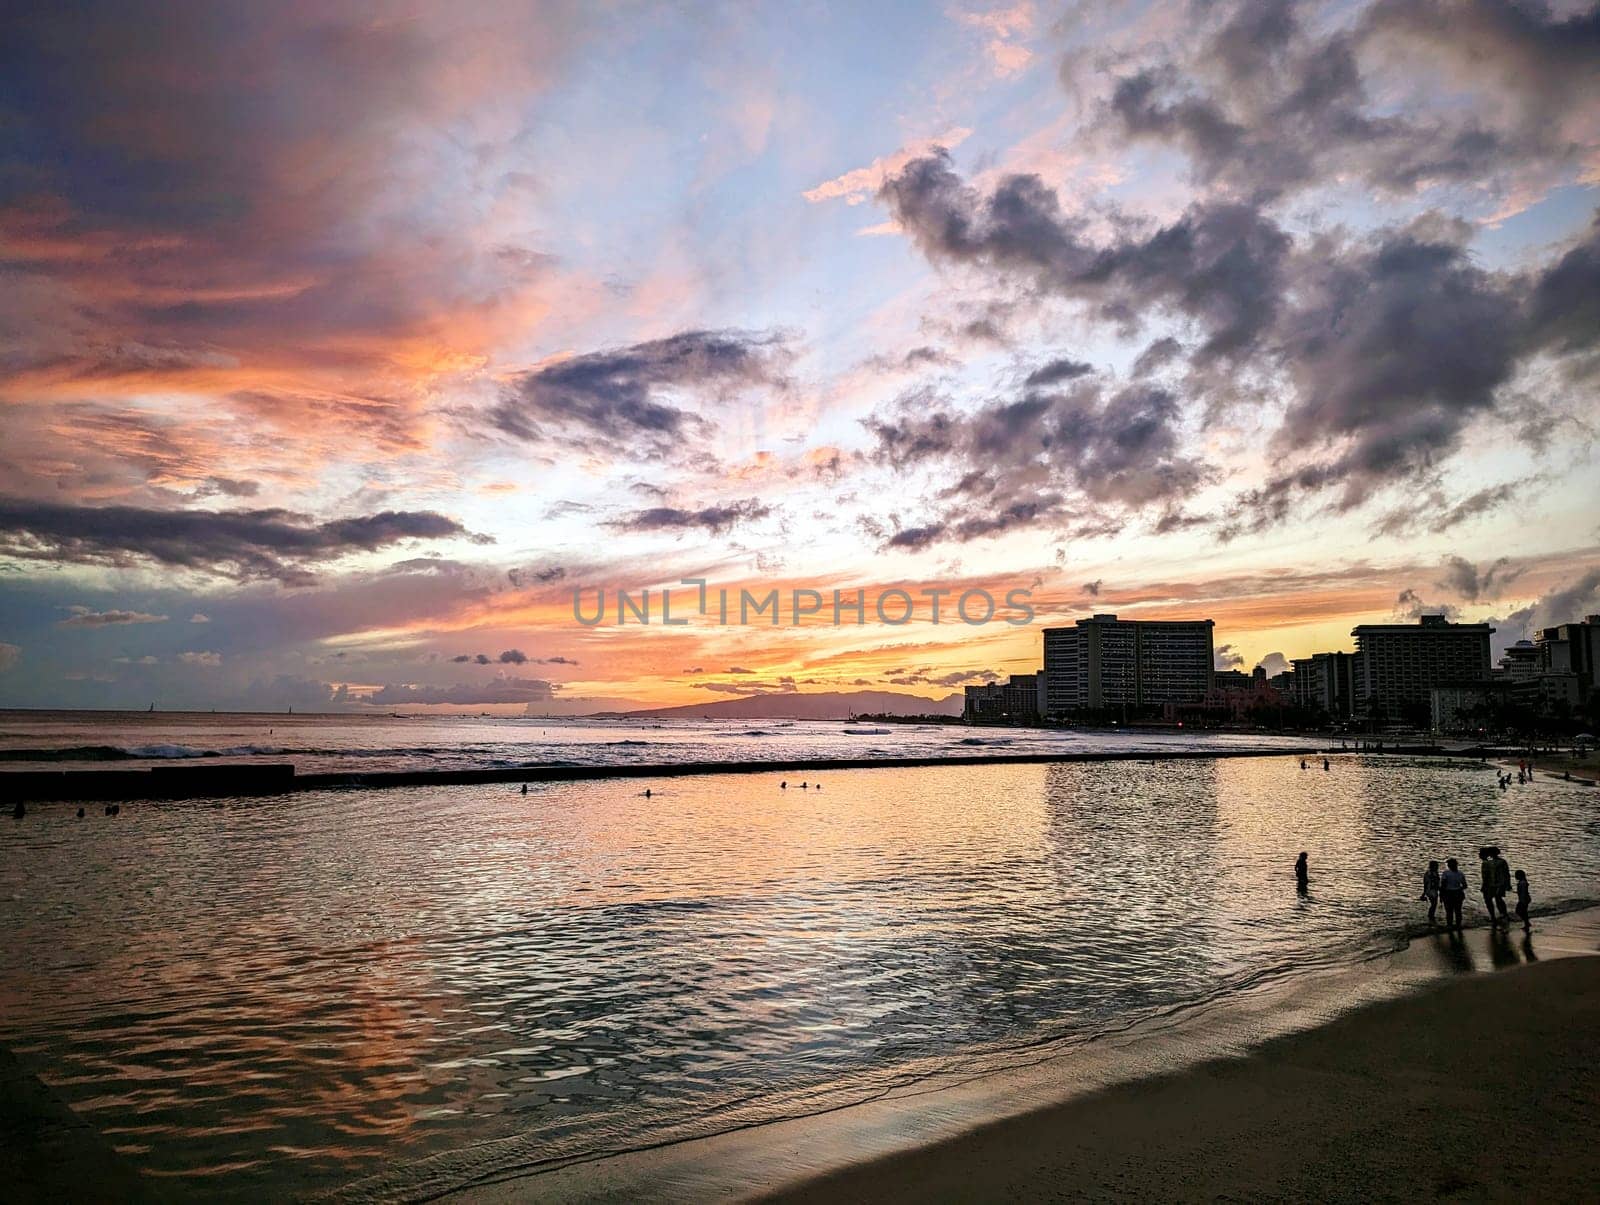 Waikiki - May 29, 2023: A stunning view of the sun setting over the Pacific Ocean, as seen from the sandy shore of Waikiki Beach in Honolulu, Hawaii. The sky is painted with vibrant colors and the water reflects the light. The silhouette of the city skyline and the palm trees add contrast and interest to the scene